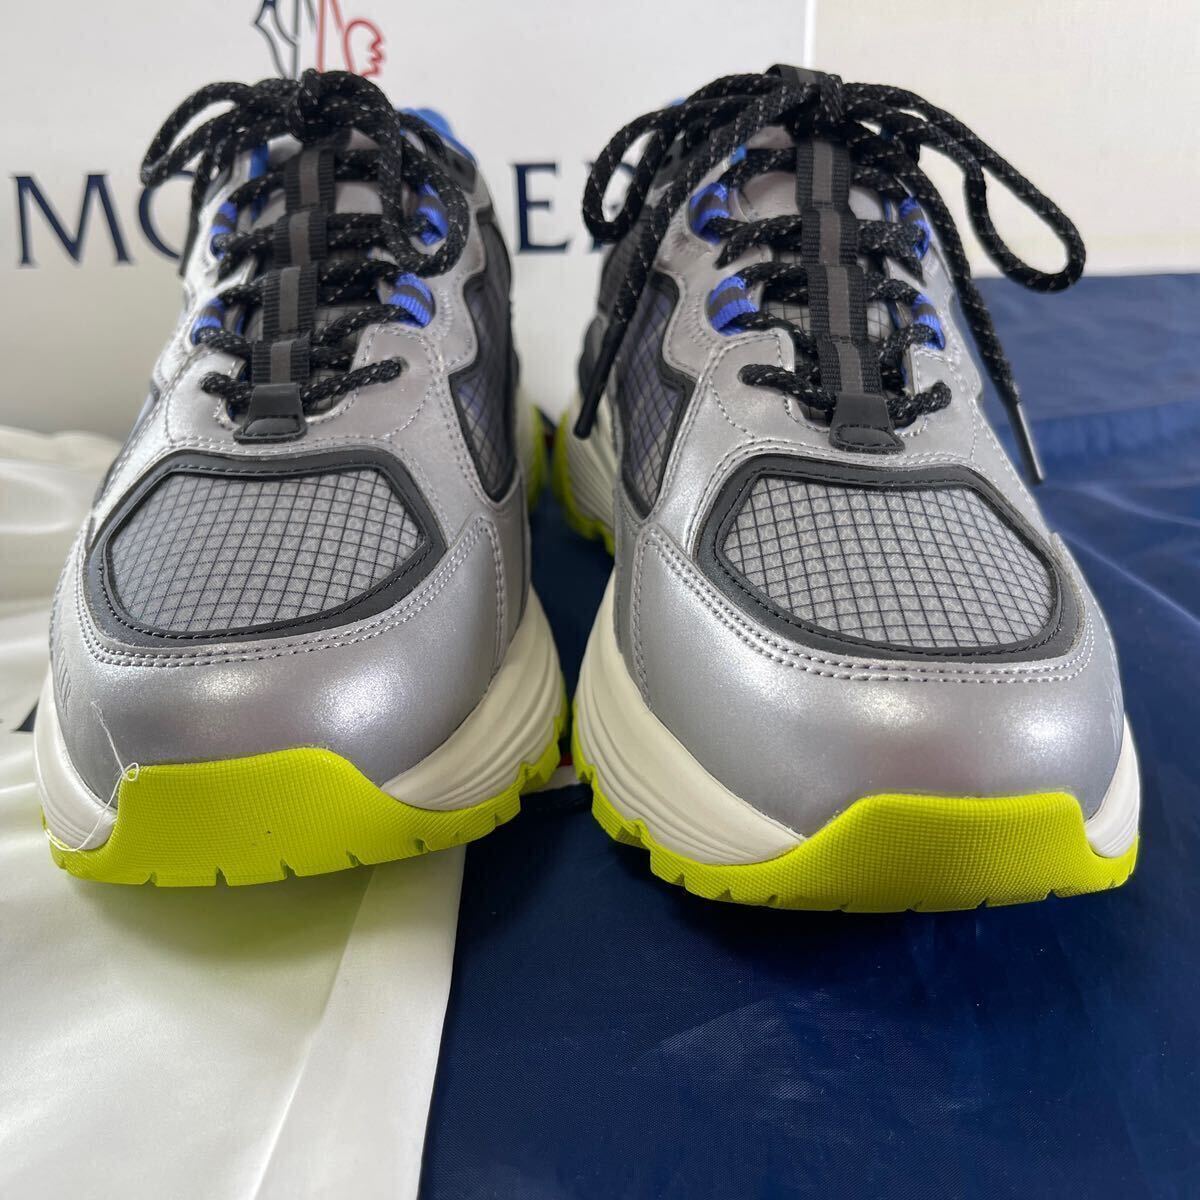  new arrival genuine article new goods 41007416 MONCLER Moncler / LITE RUNNER sneakers / size 42( Japan size 27. corresponding ) silver 